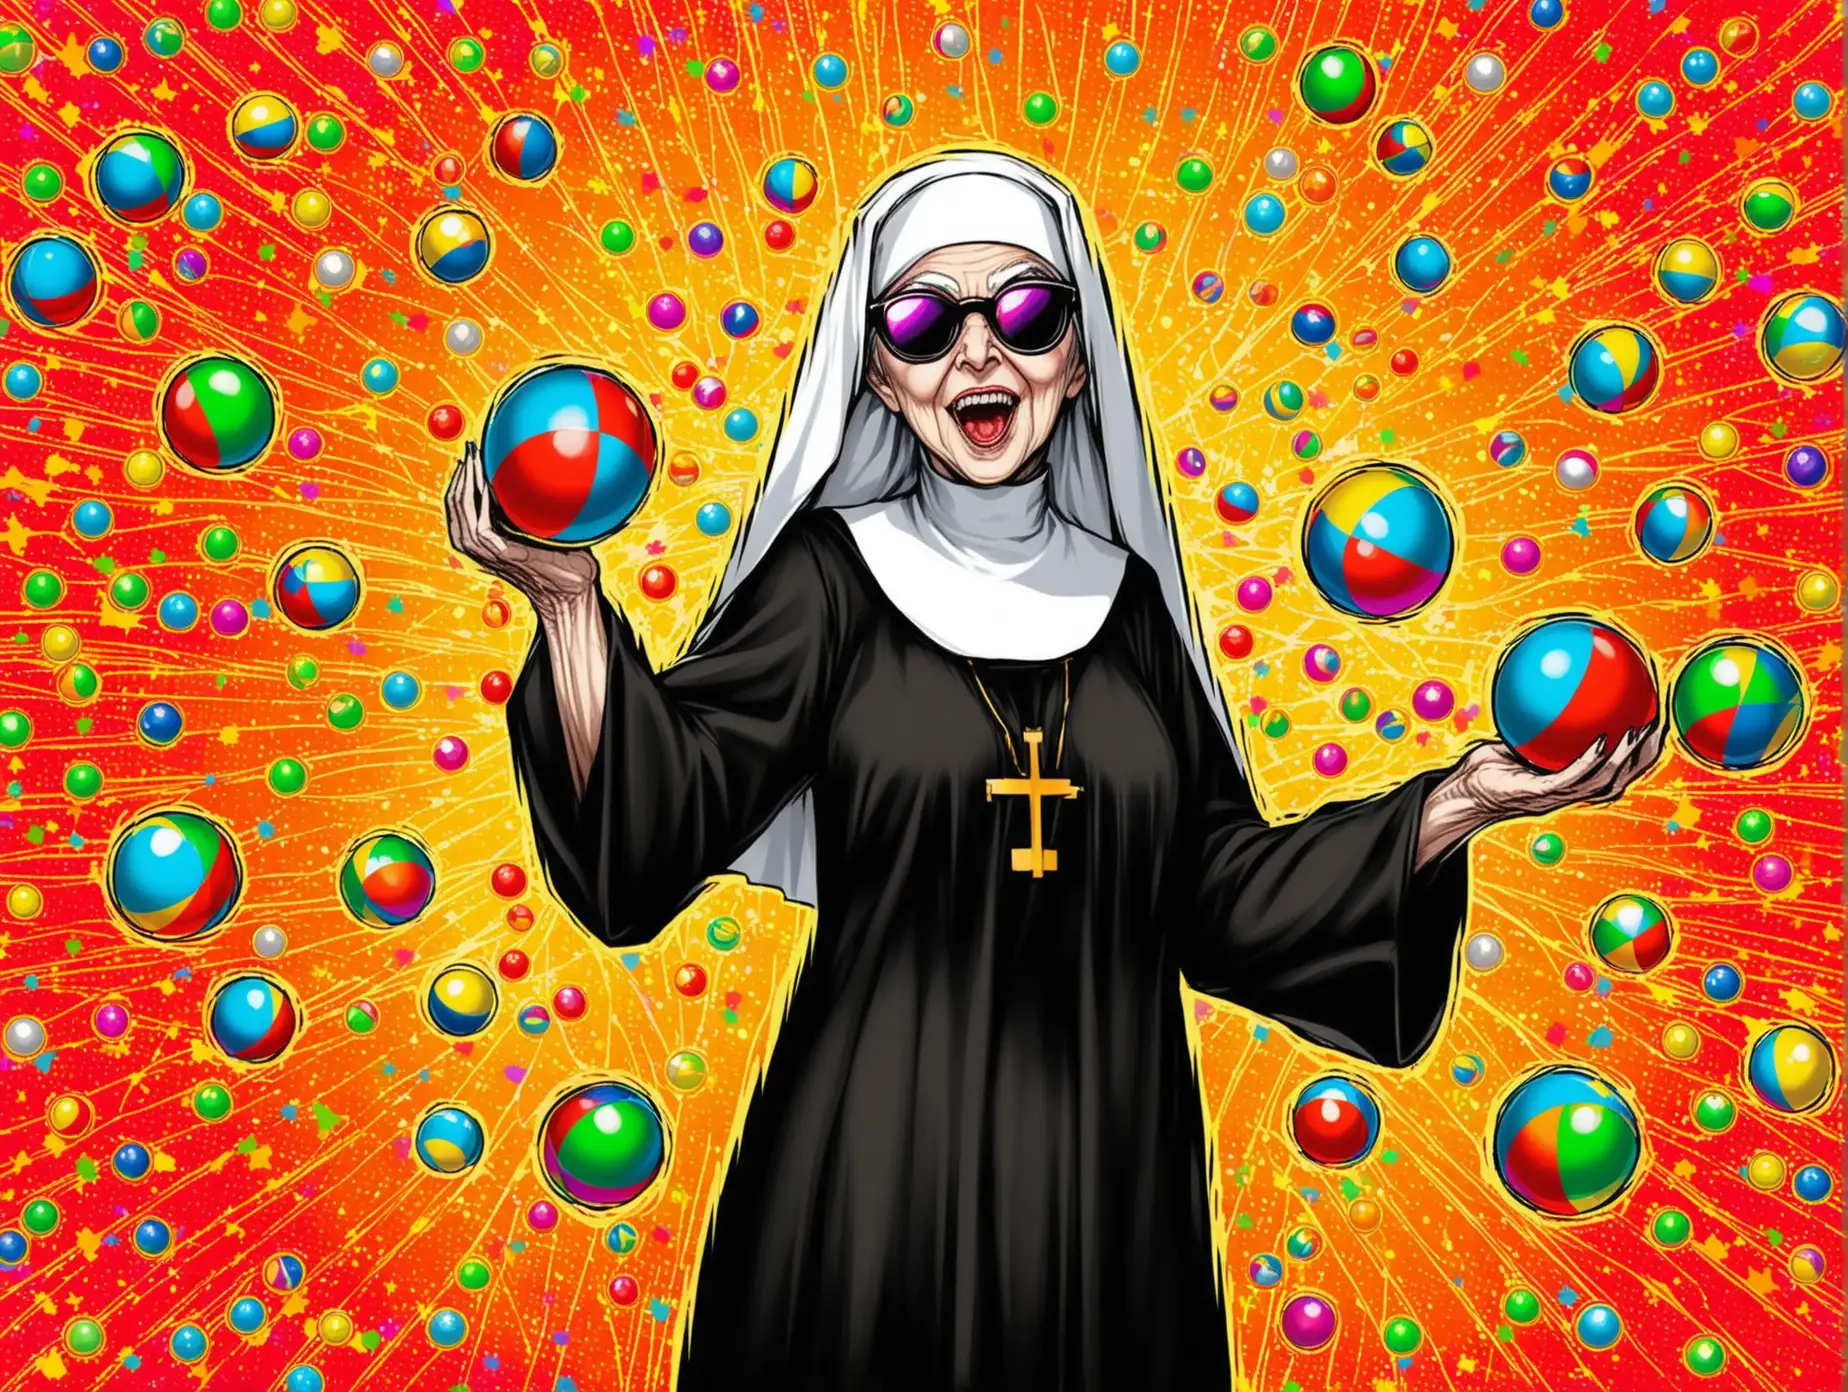 CRAZY OLD NUN (NO CROSS)WEARING SUNGLASSES JUGGLING BALLS  IN STYLE OF JACKSON POLLOCK AND KUSTAV KLIMT PSYCHEDELIC, CRAZY BACKGROUND, MOSTLY   nn NUN JUGGLING BALLnNOT WEARING CROSSnnn